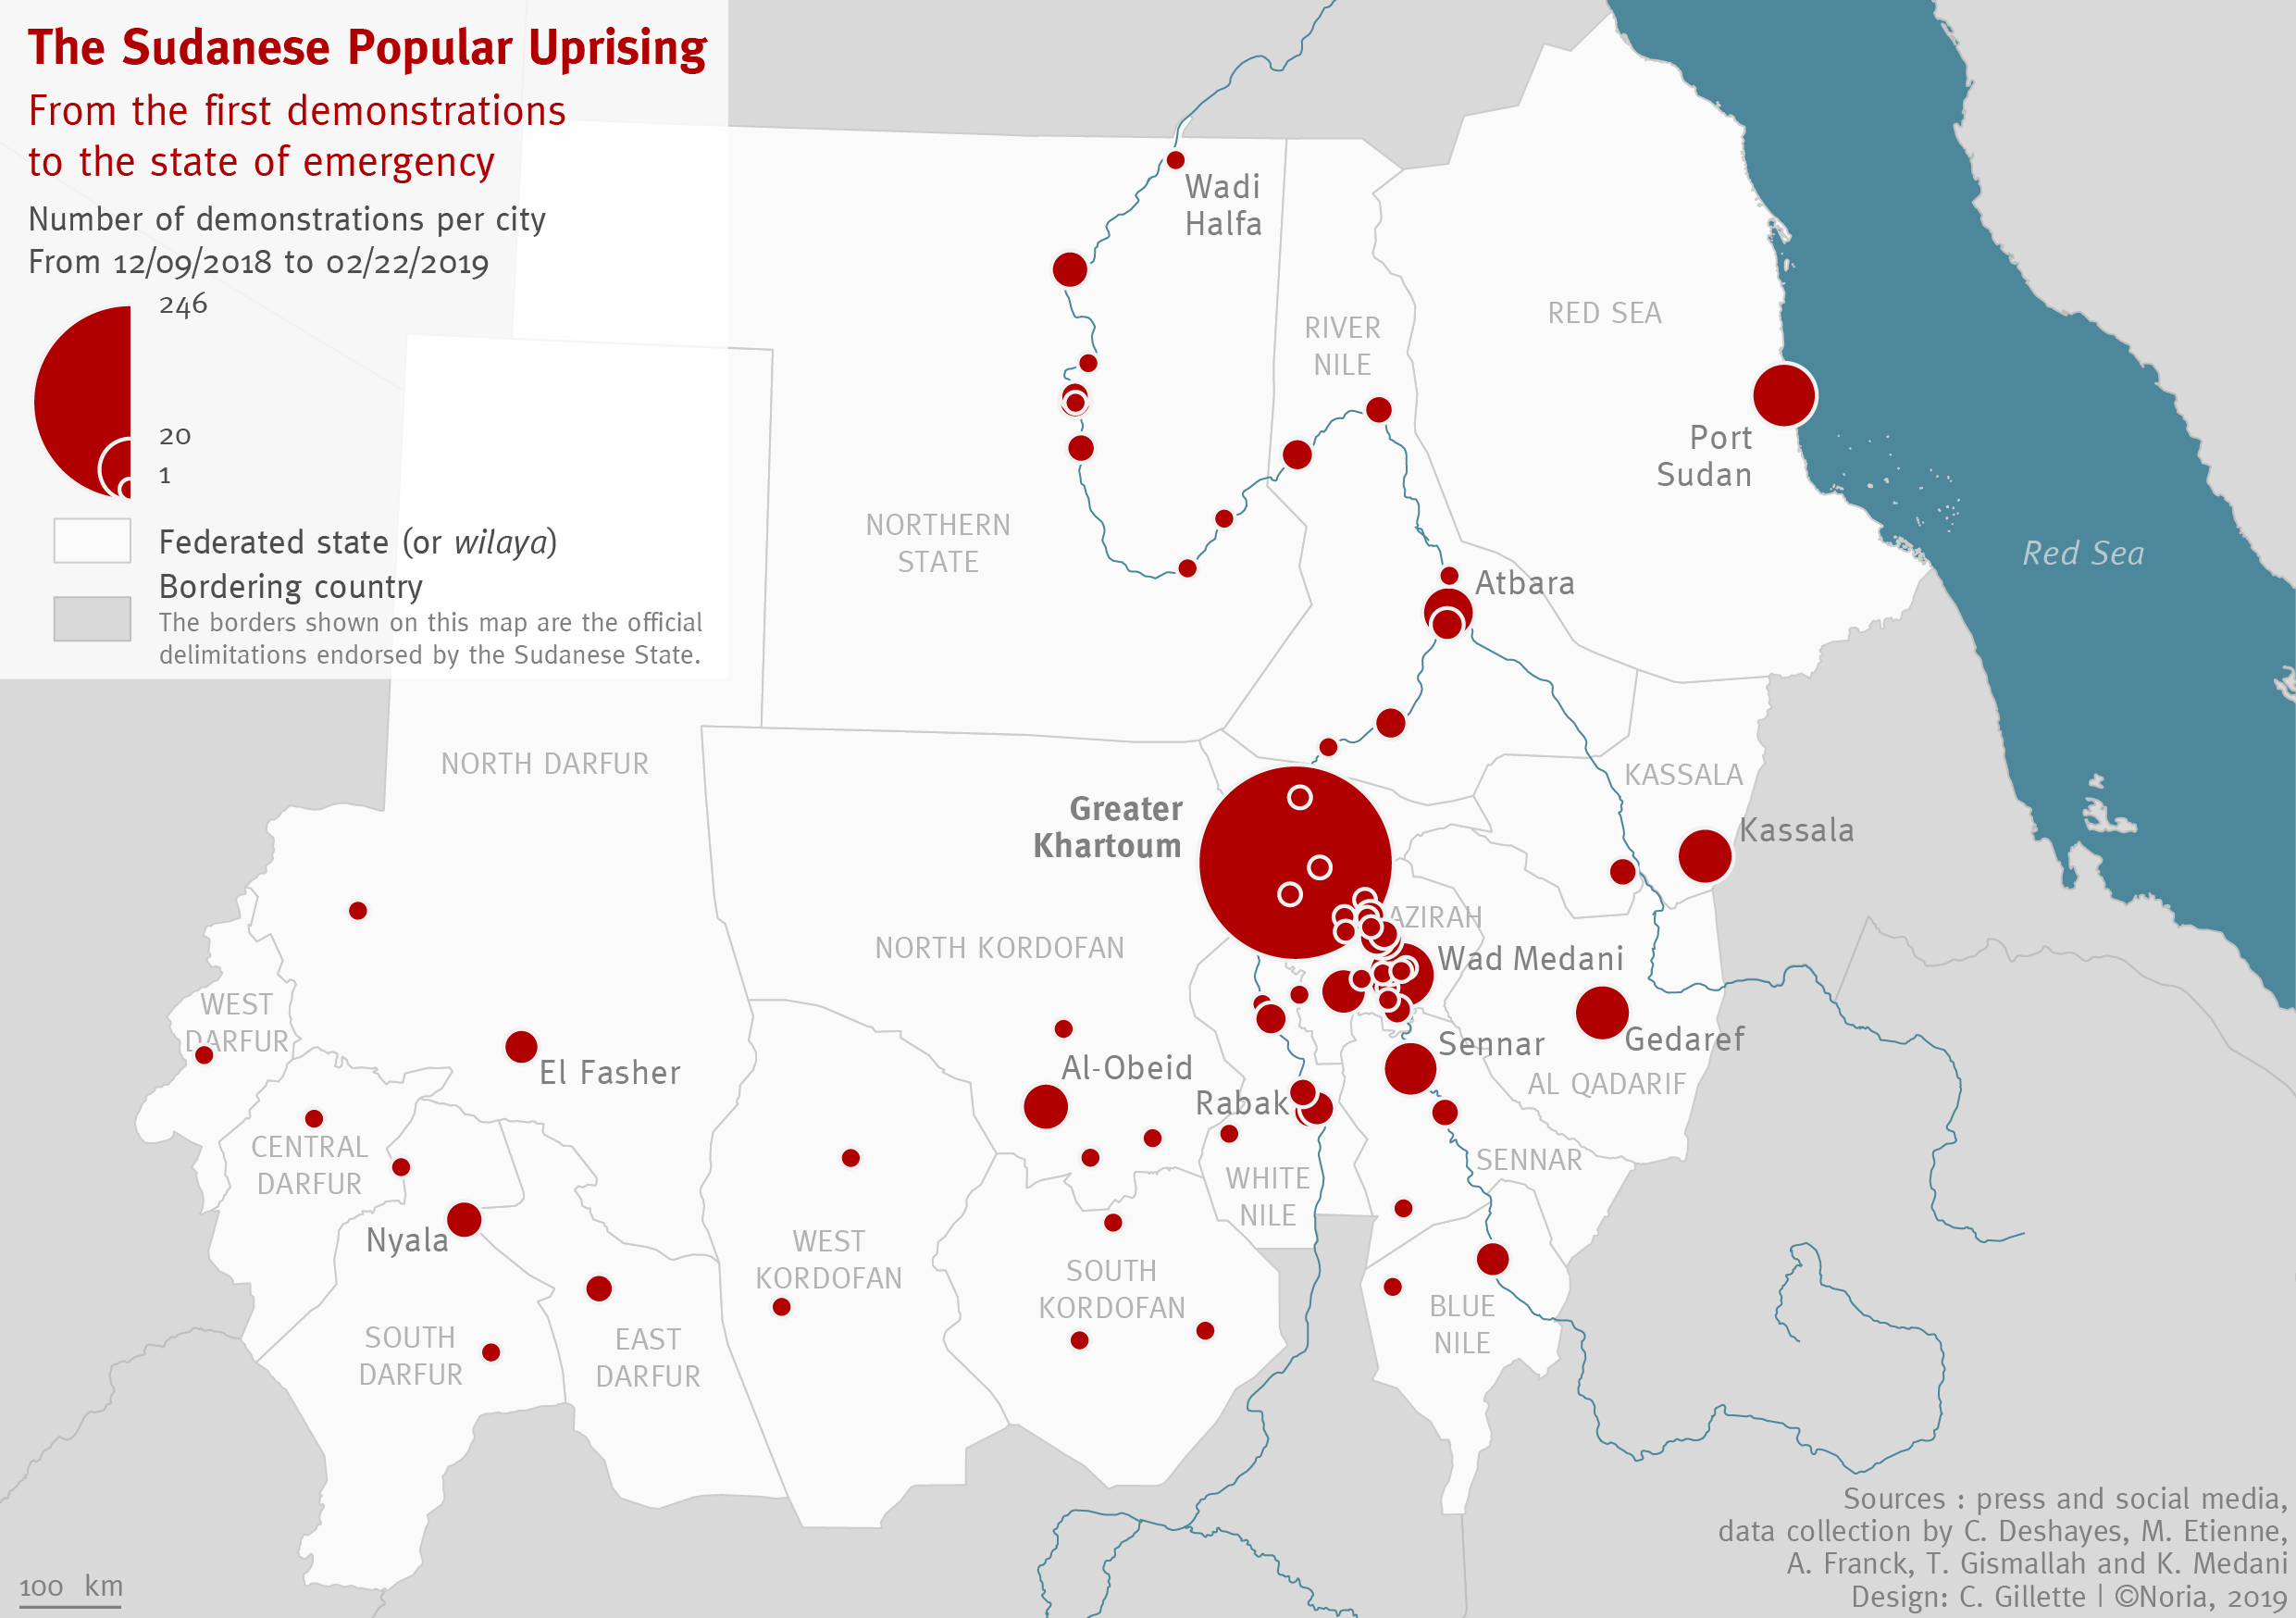 The Sudanese Popular Uprising: From the First Demonstration to the State of Emergency